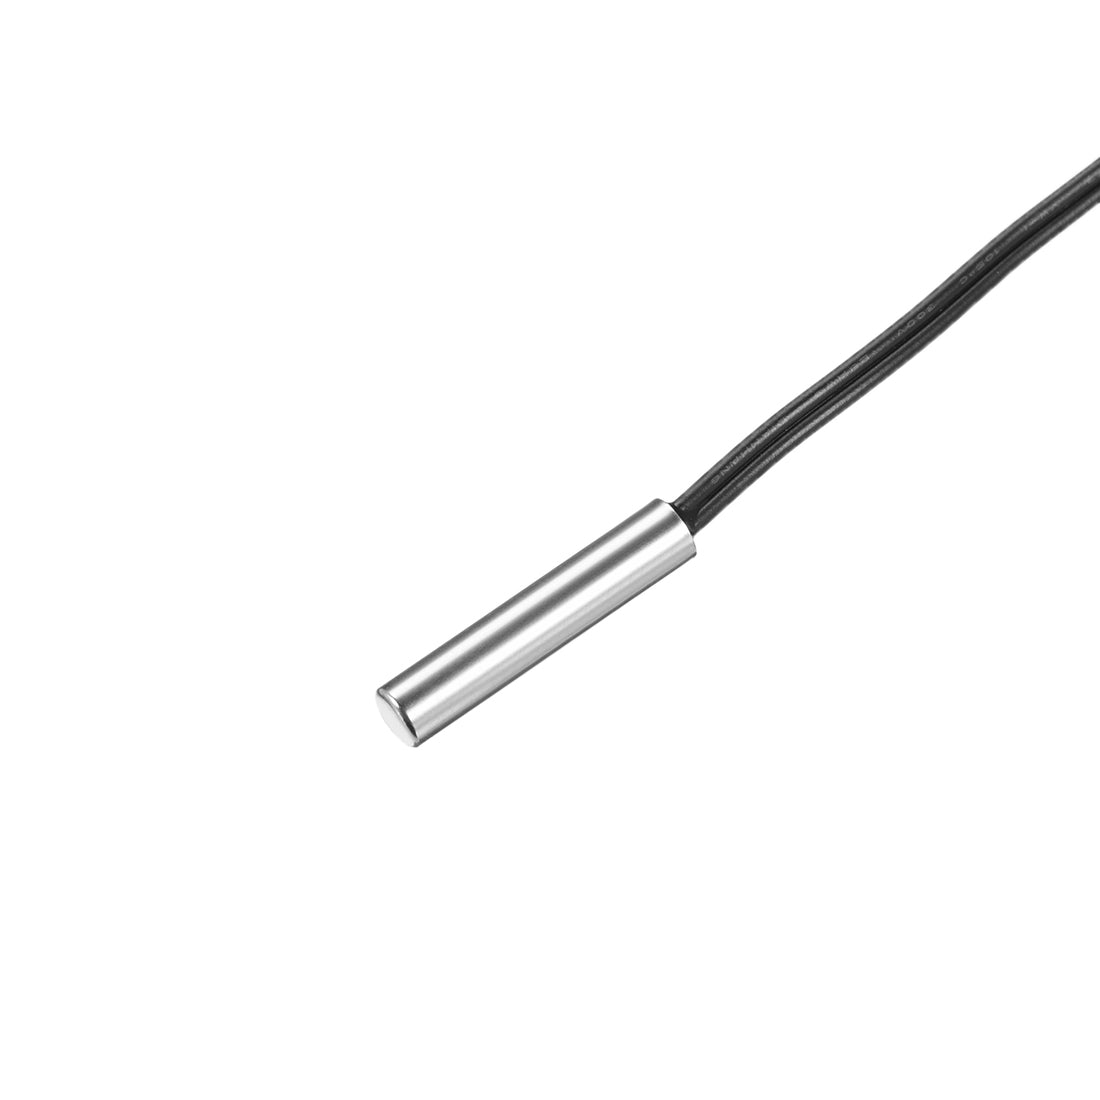 uxcell Uxcell 50K NTC Thermistor Probe 39.4 Inch Stainless Steel Sensitive Temperature Temp Sensor for Air Conditioner